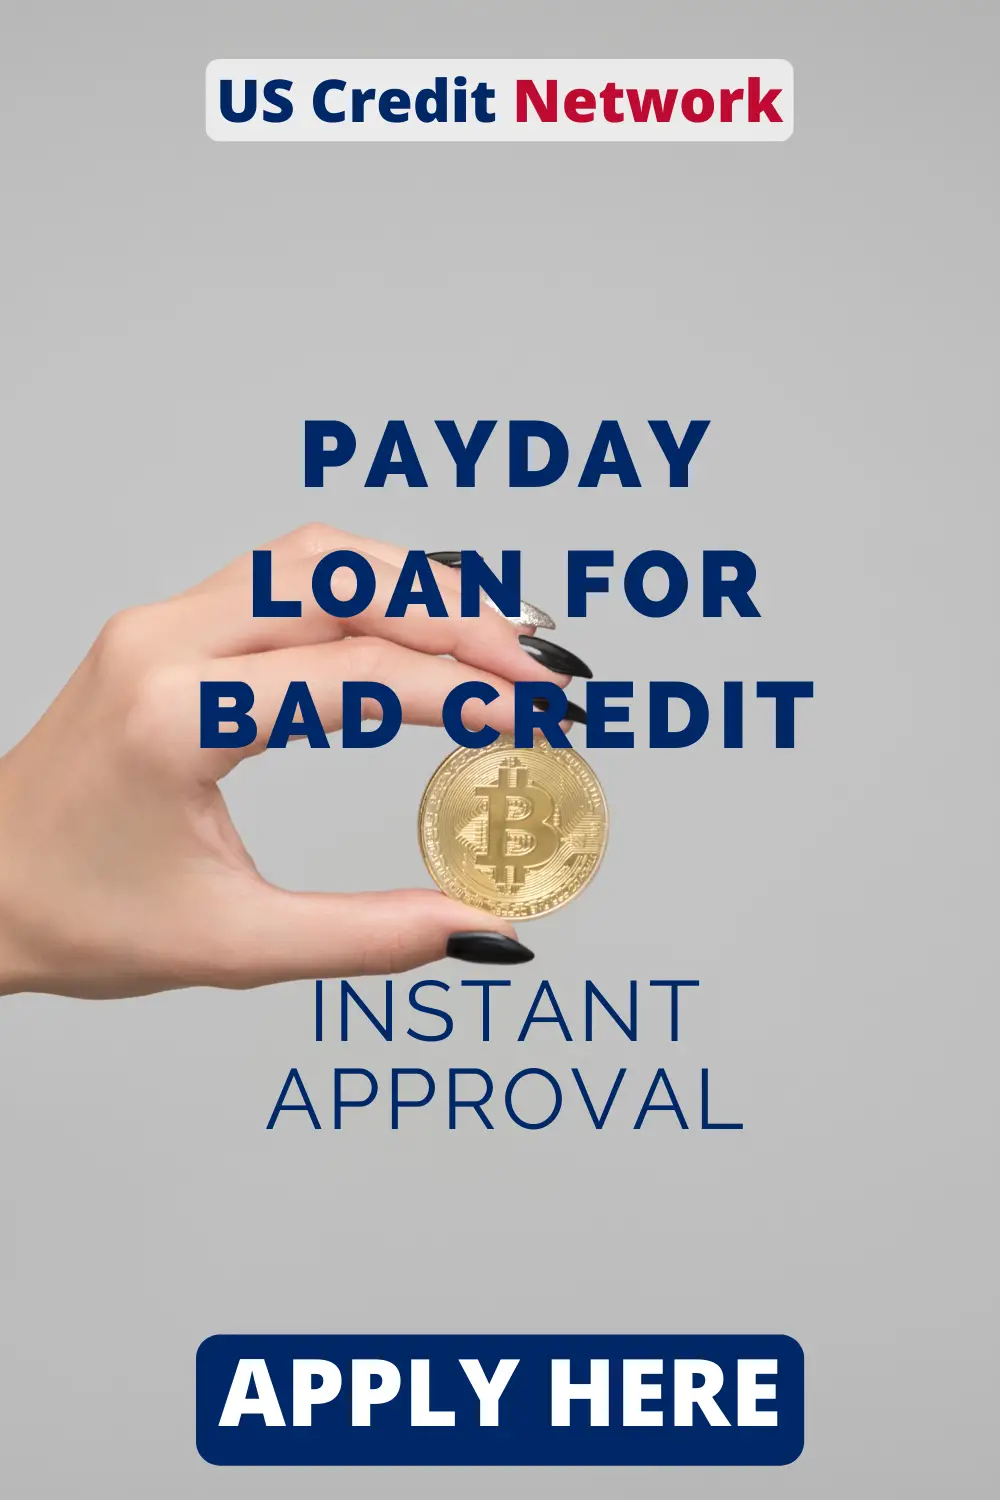 Can I Get A Payday Loan If I Have Bad Credit